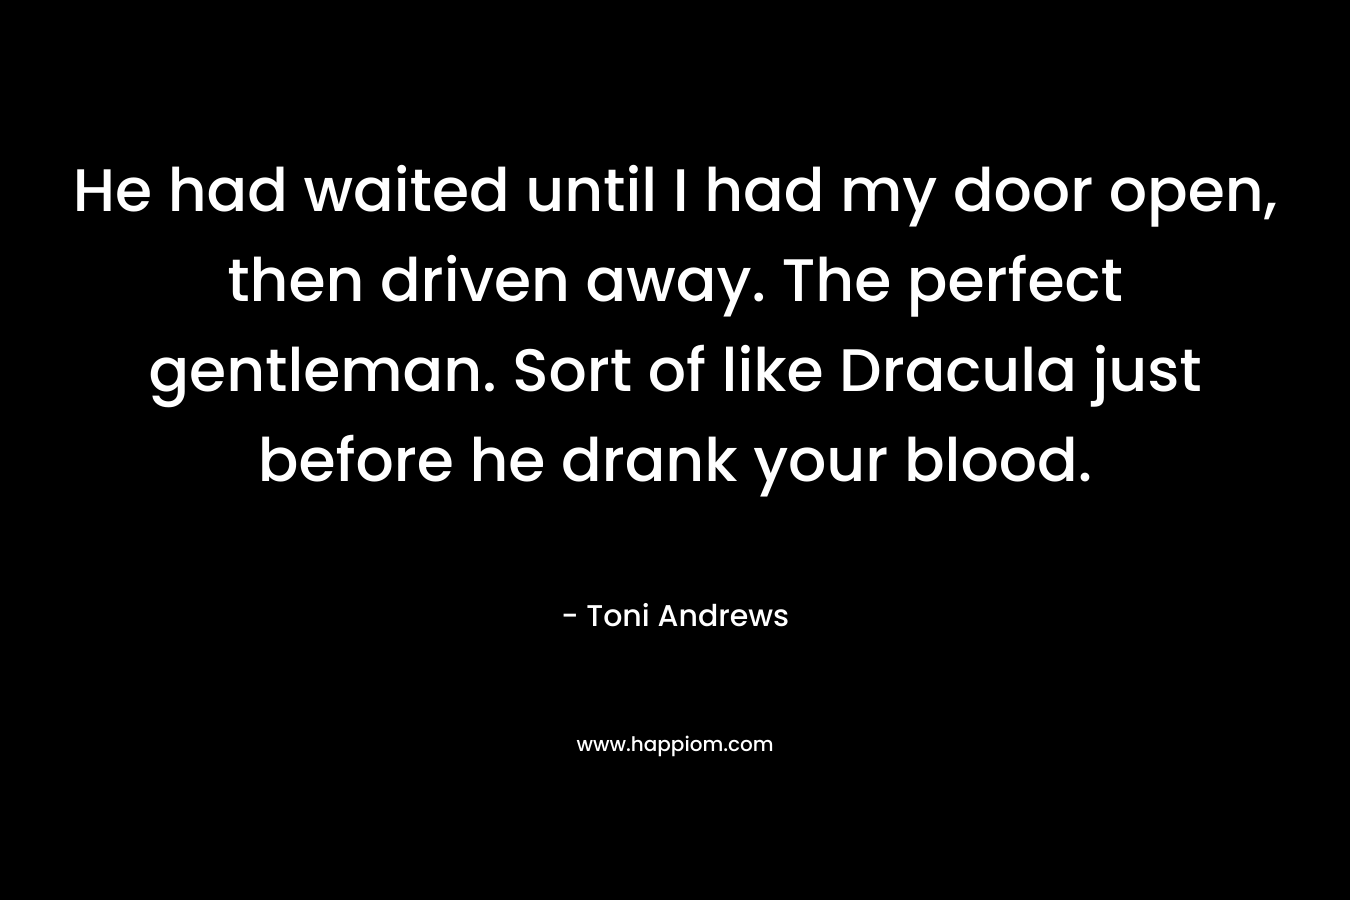 He had waited until I had my door open, then driven away. The perfect gentleman. Sort of like Dracula just before he drank your blood. – Toni Andrews